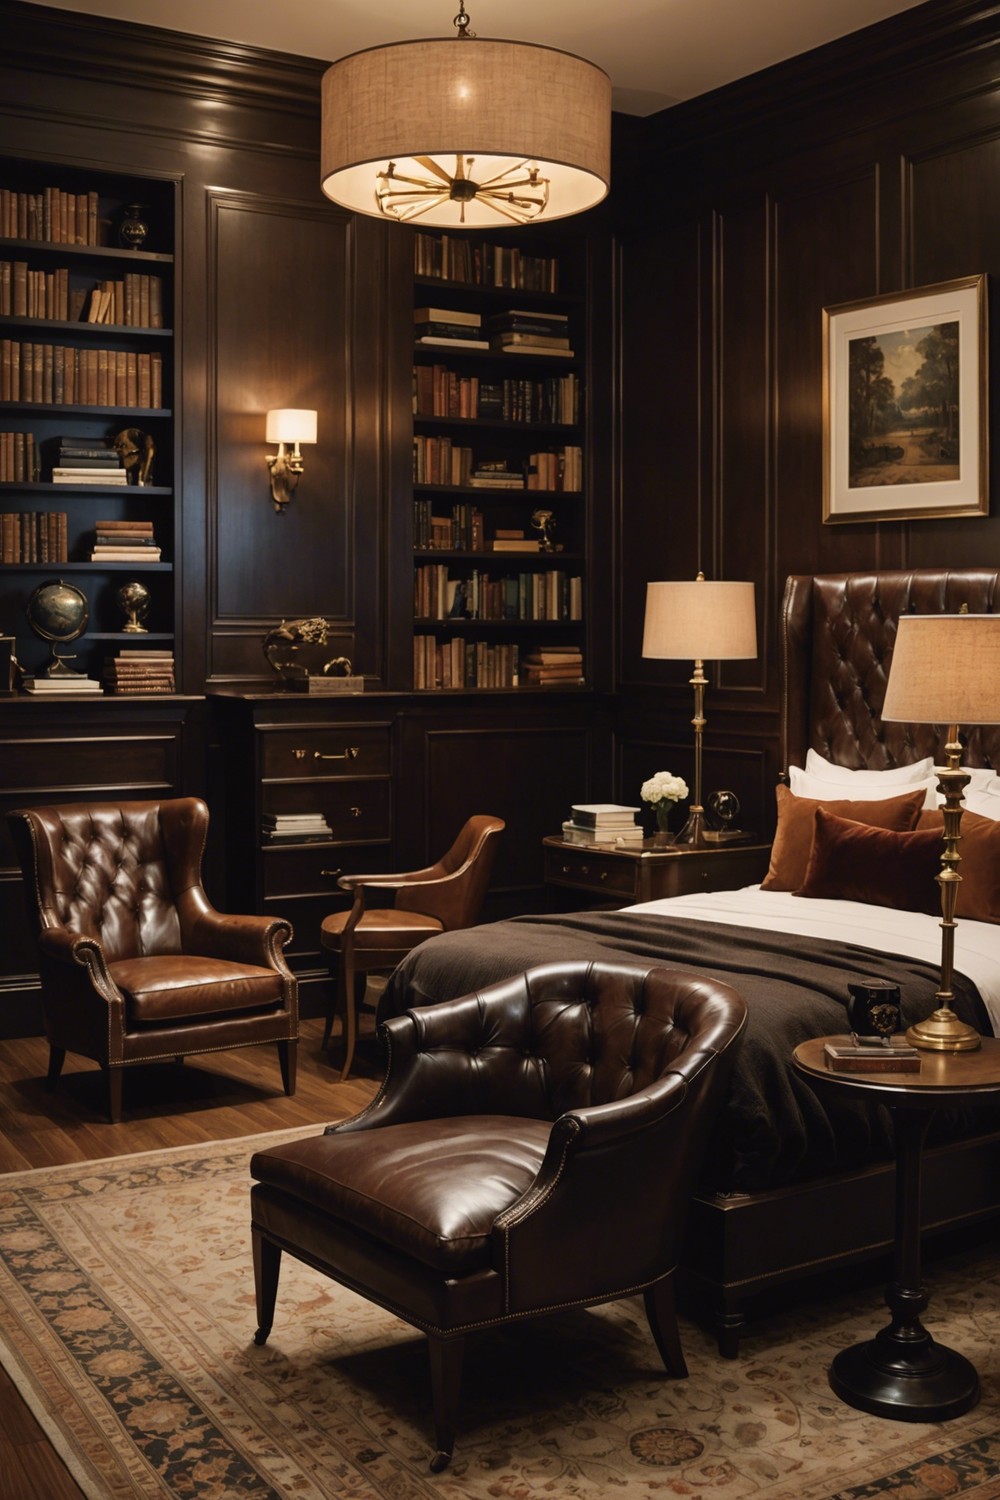 The Gentleman's Quarters: A Masculine, Sophisticated Space